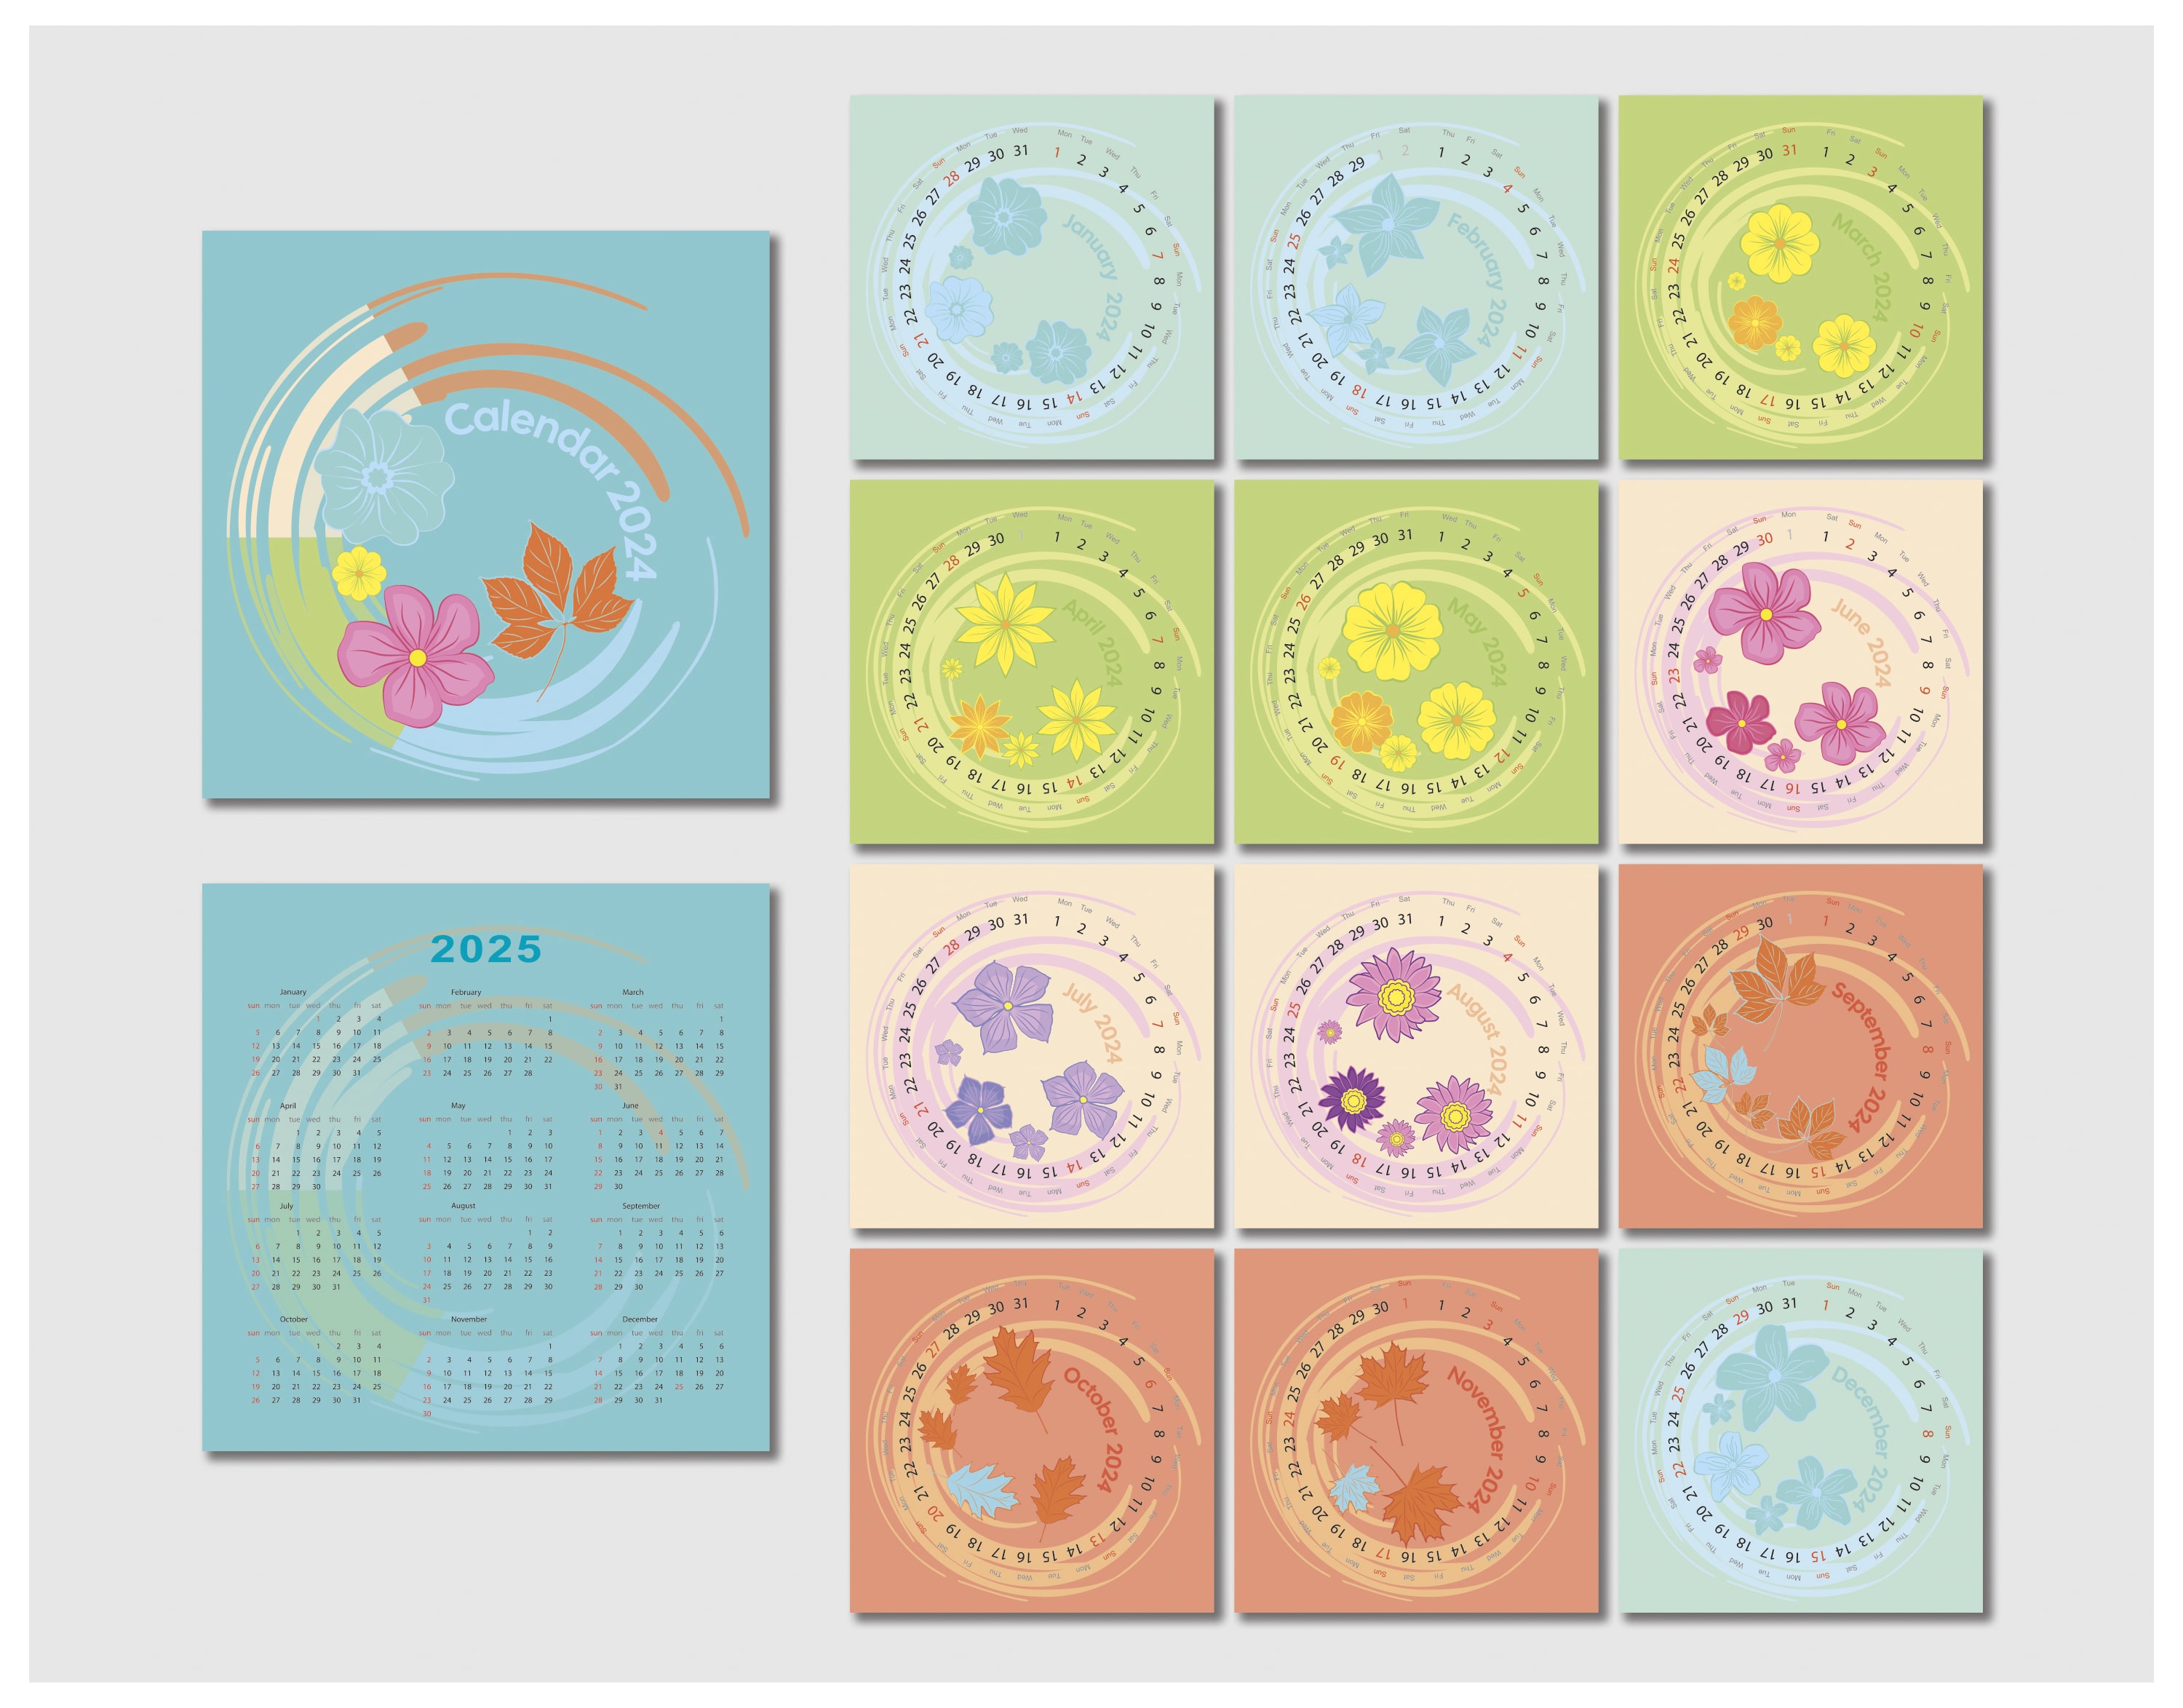 calendar 2024 numbers around the circle floral elements editable square pages 297x297 mm page cover 2 min 388